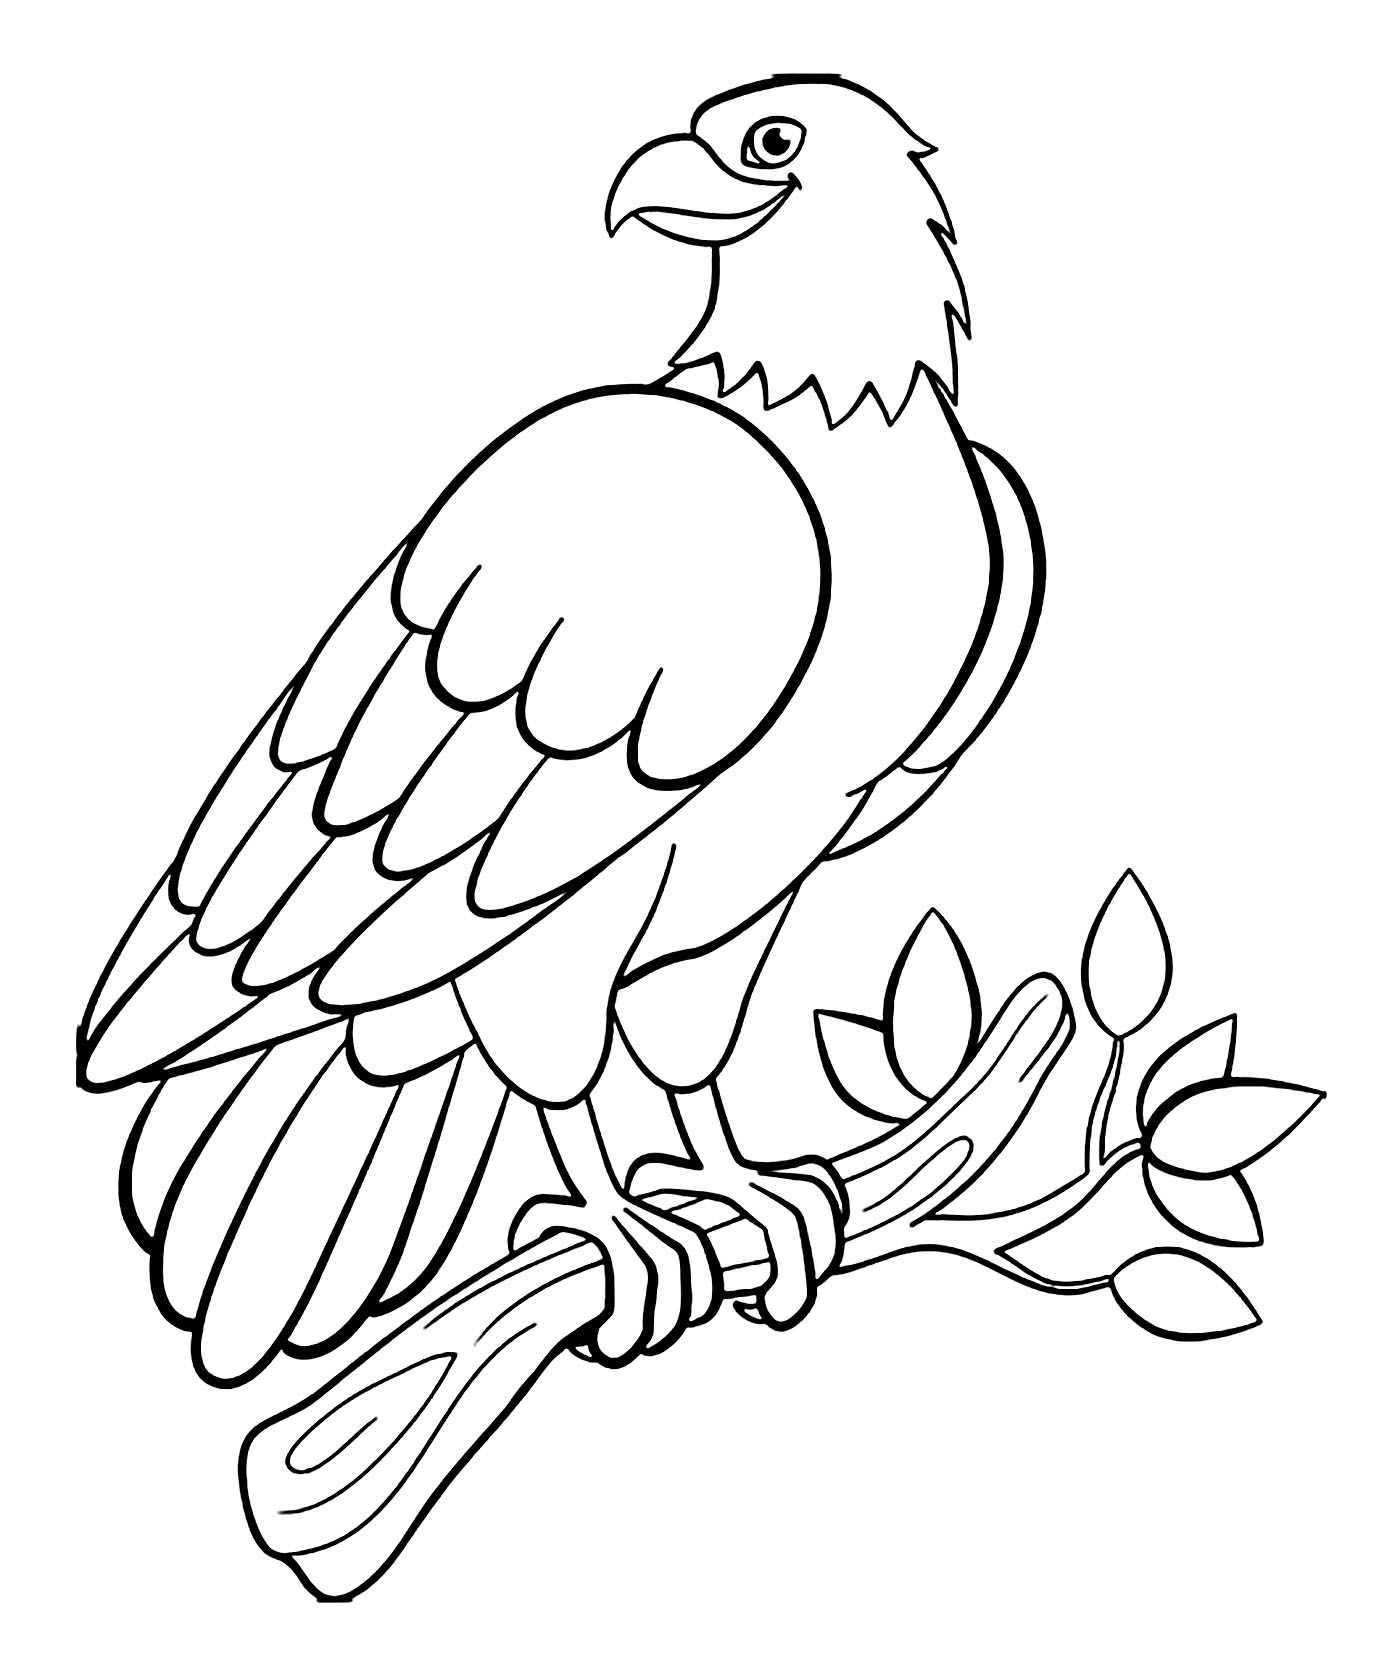 Download Birds to print - Birds Kids Coloring Pages